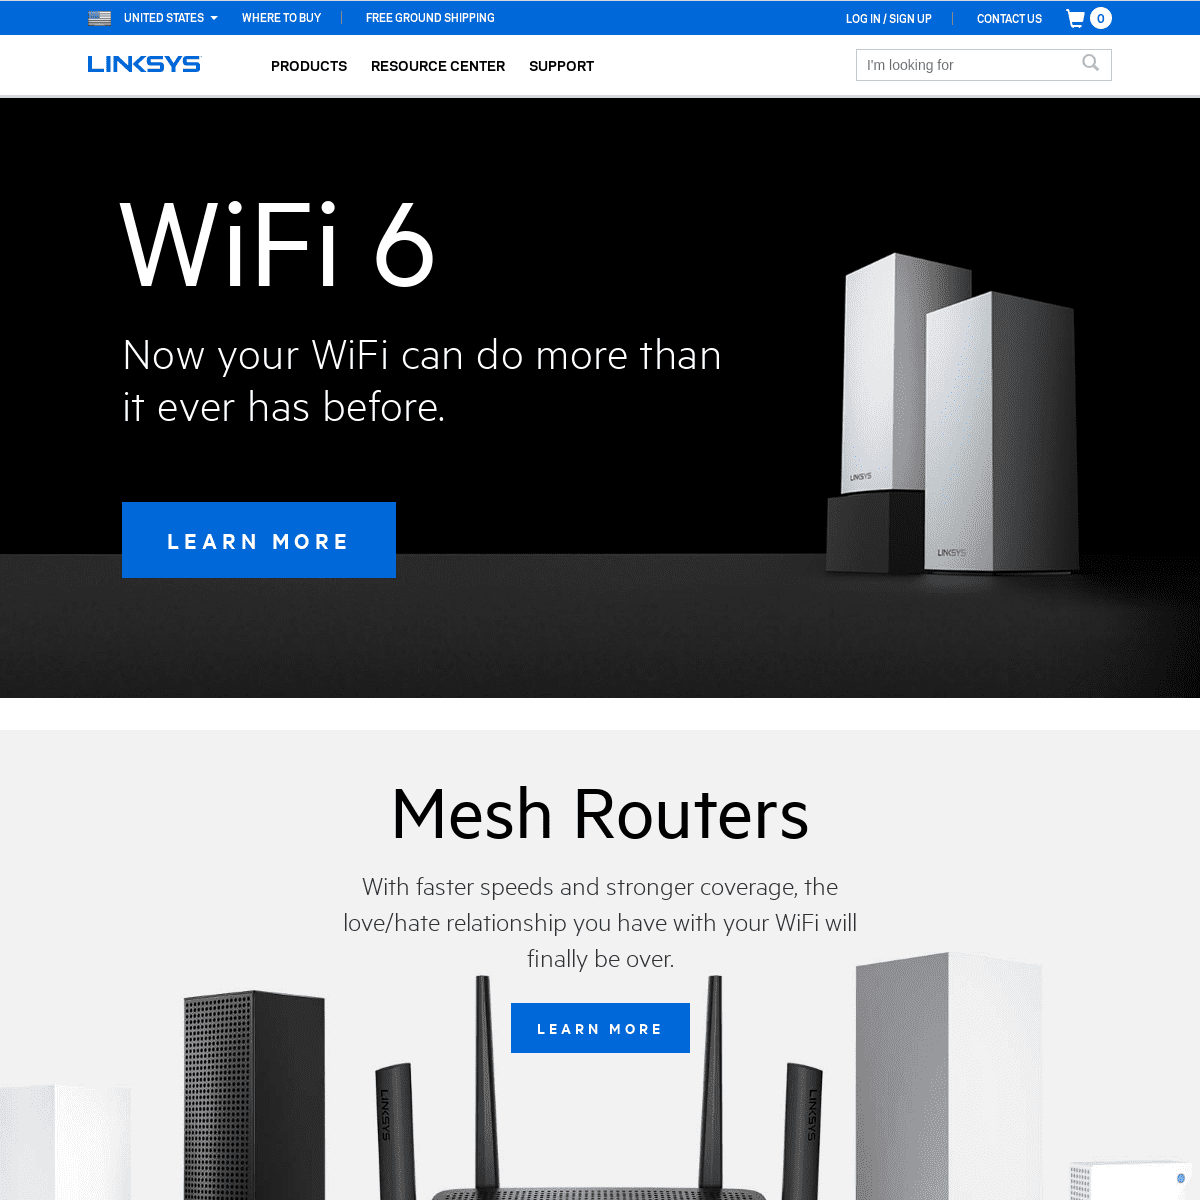 A complete backup of linksys.com